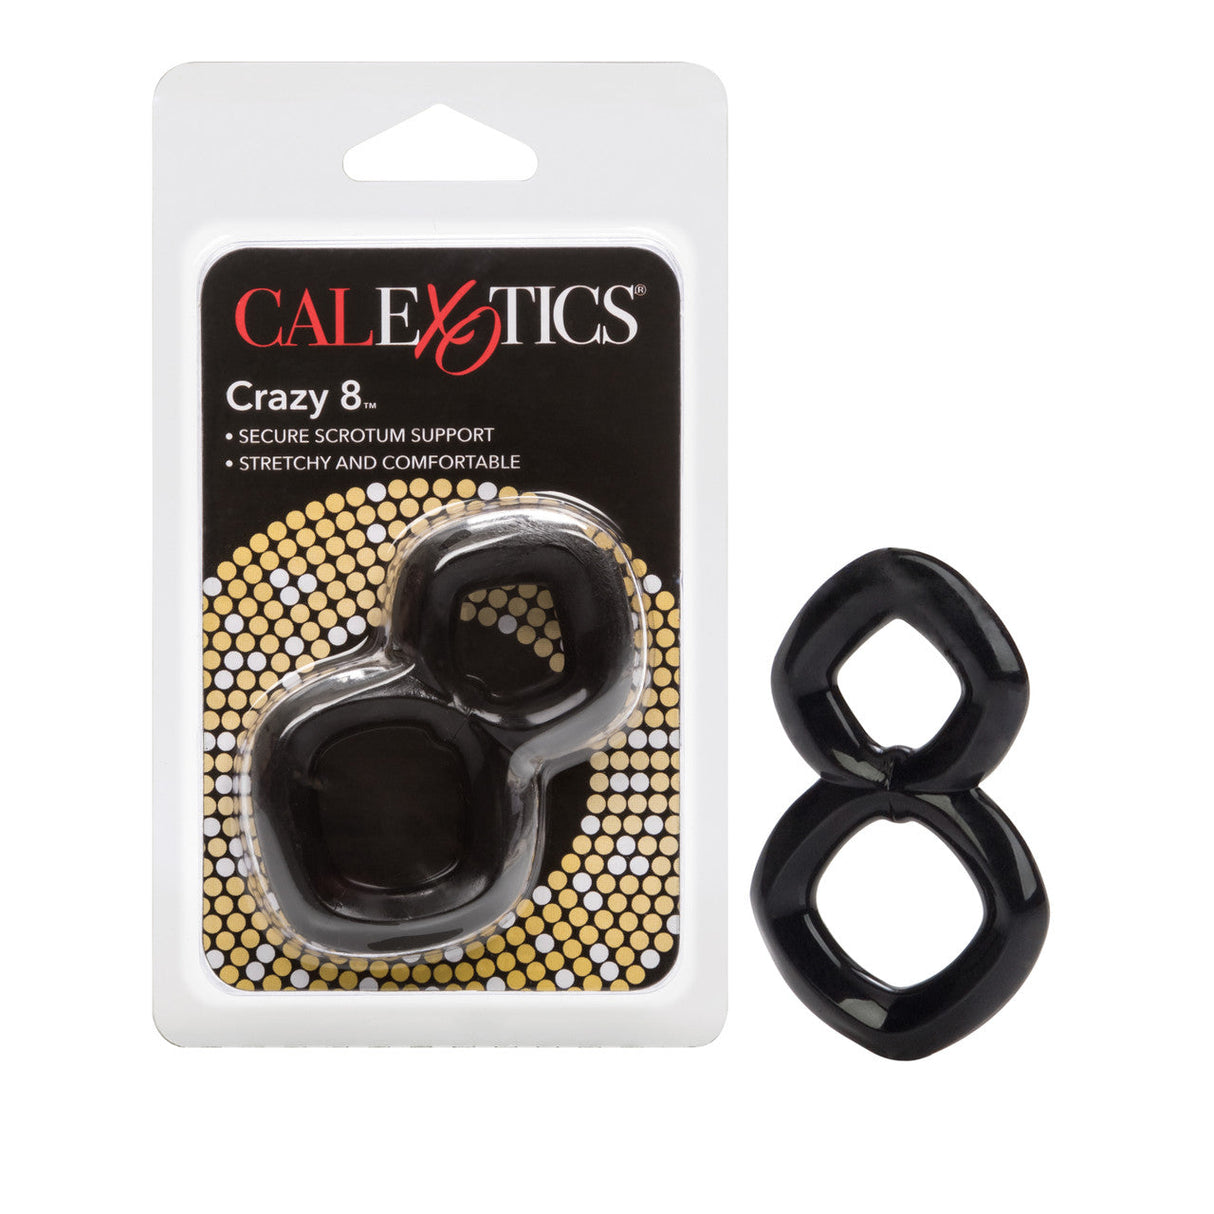 Crazy 8 Double Cock Ring